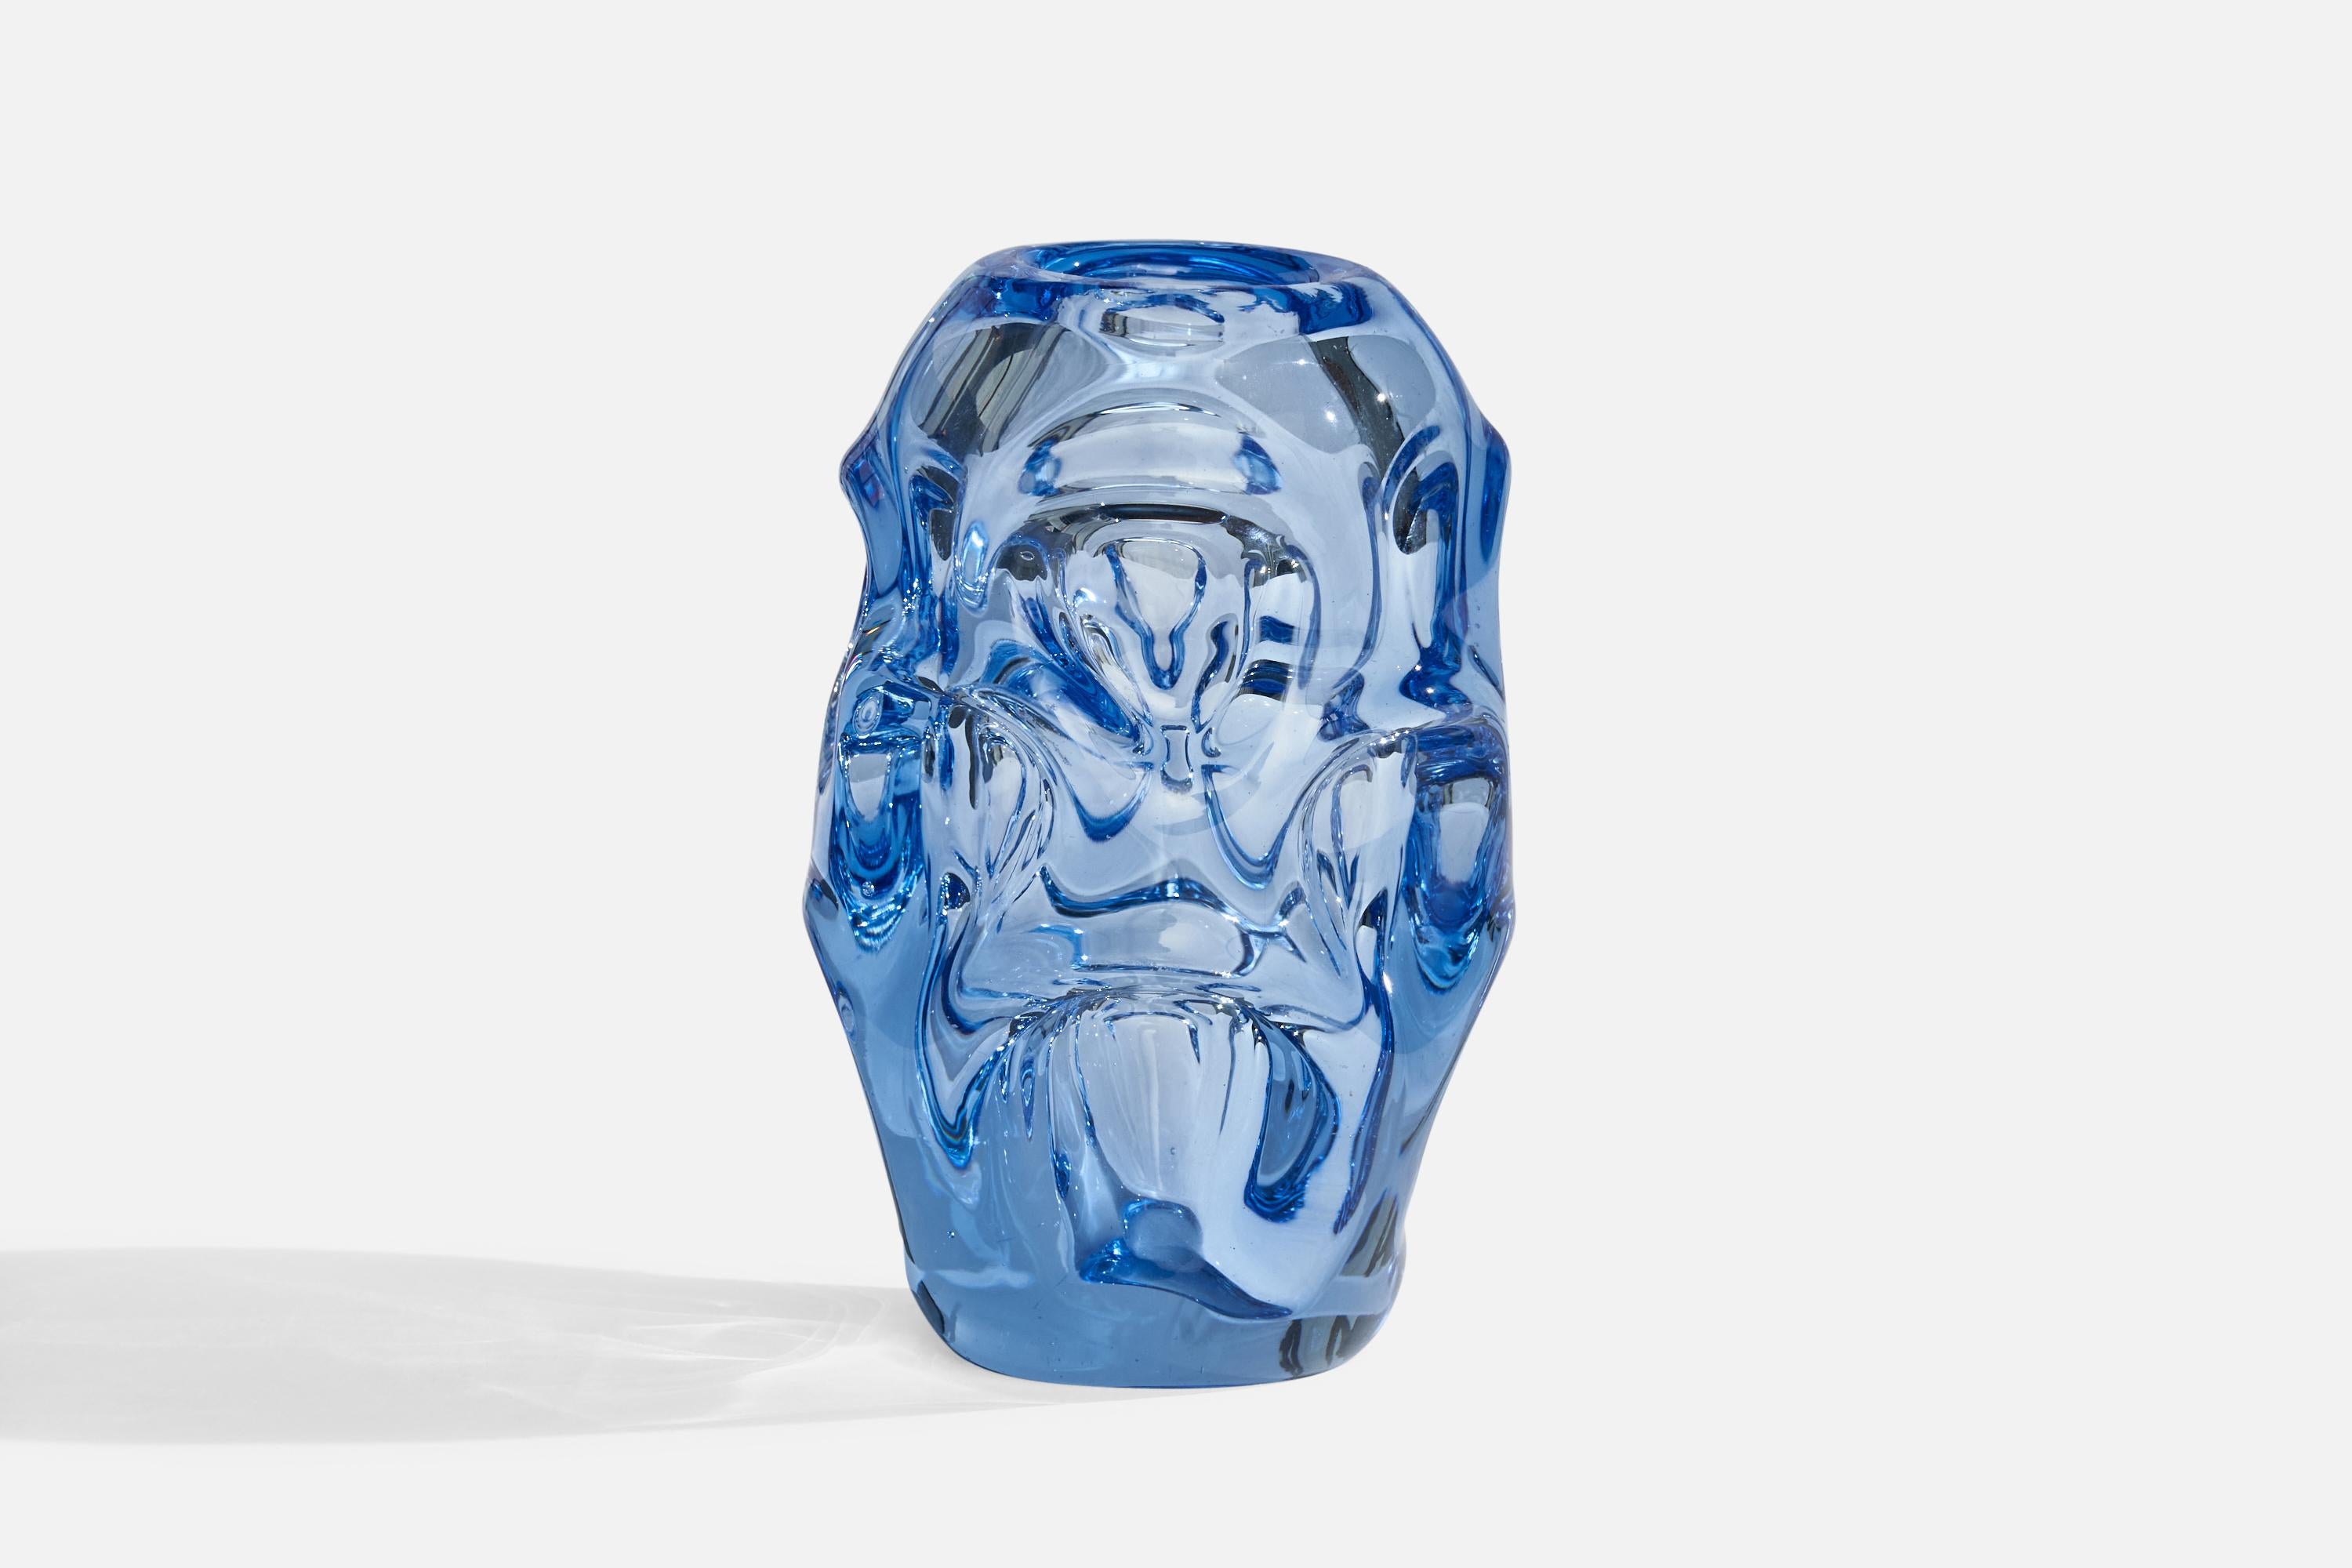 A organic blue-colored blown glass vase designed by Börne Augustsson and produced by Åseda Glasbruk, Sweden, c. 1940s.